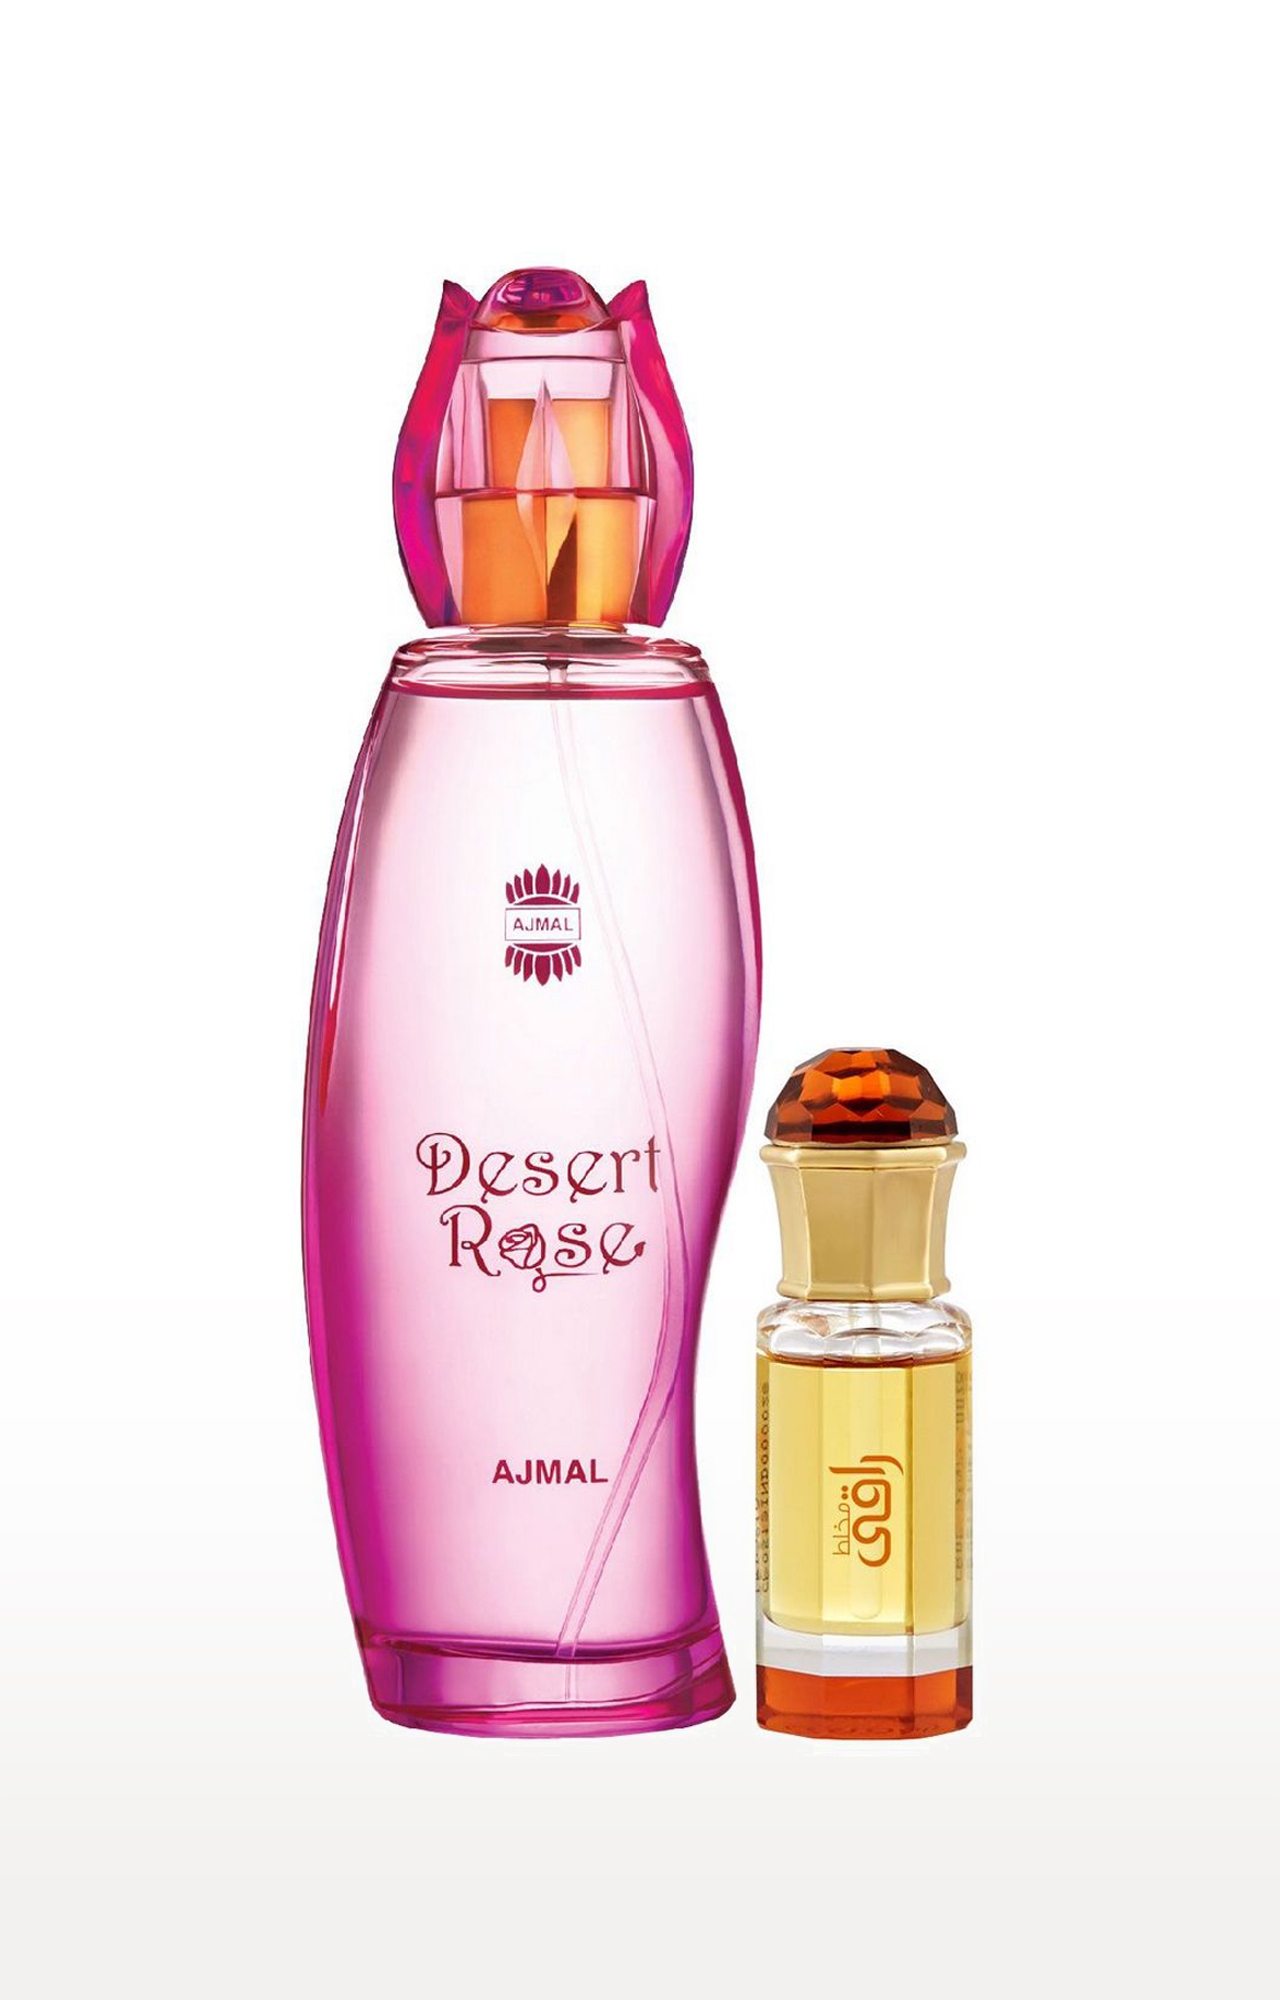 Ajmal | Ajmal Desert Rose EDP Floral Oriental Perfume 100ml for Women and Mukhallat Raaqi Concentrated Perfume Oil Floral Fruity Alcohol-free Attar 10ml for Unisex + 2 Parfum Testers FREE